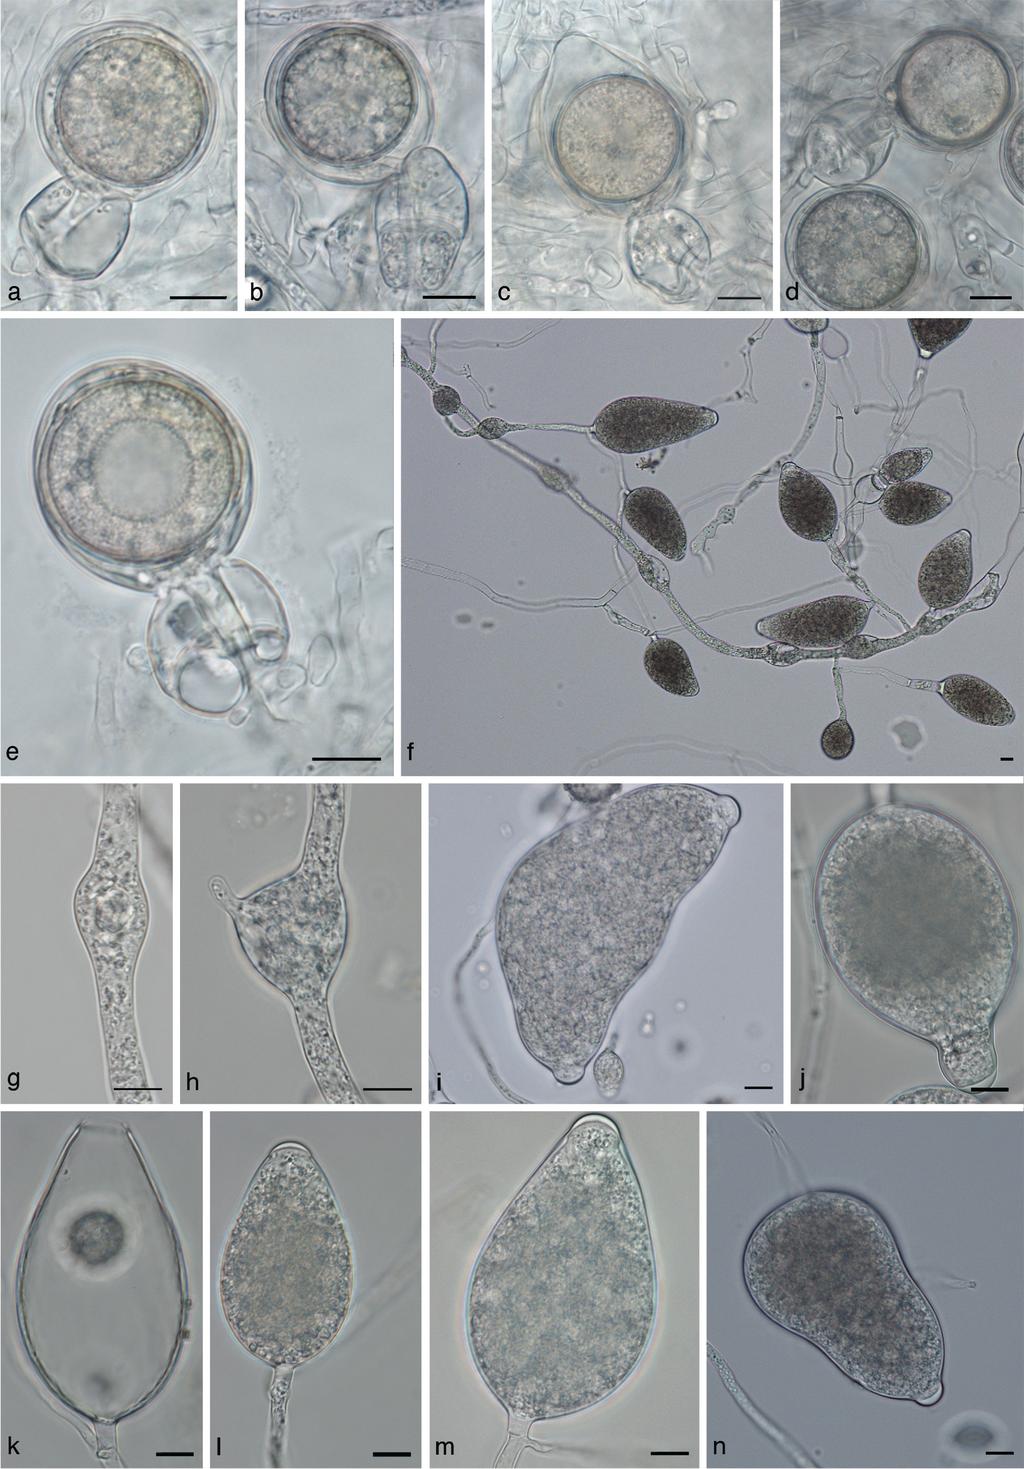 70 Persoonia Volume 31, 2013 Fig. 5 Phytophthora cichorii morphology. a e. Oogonia with 2-celled amphigynous antheridia; f.